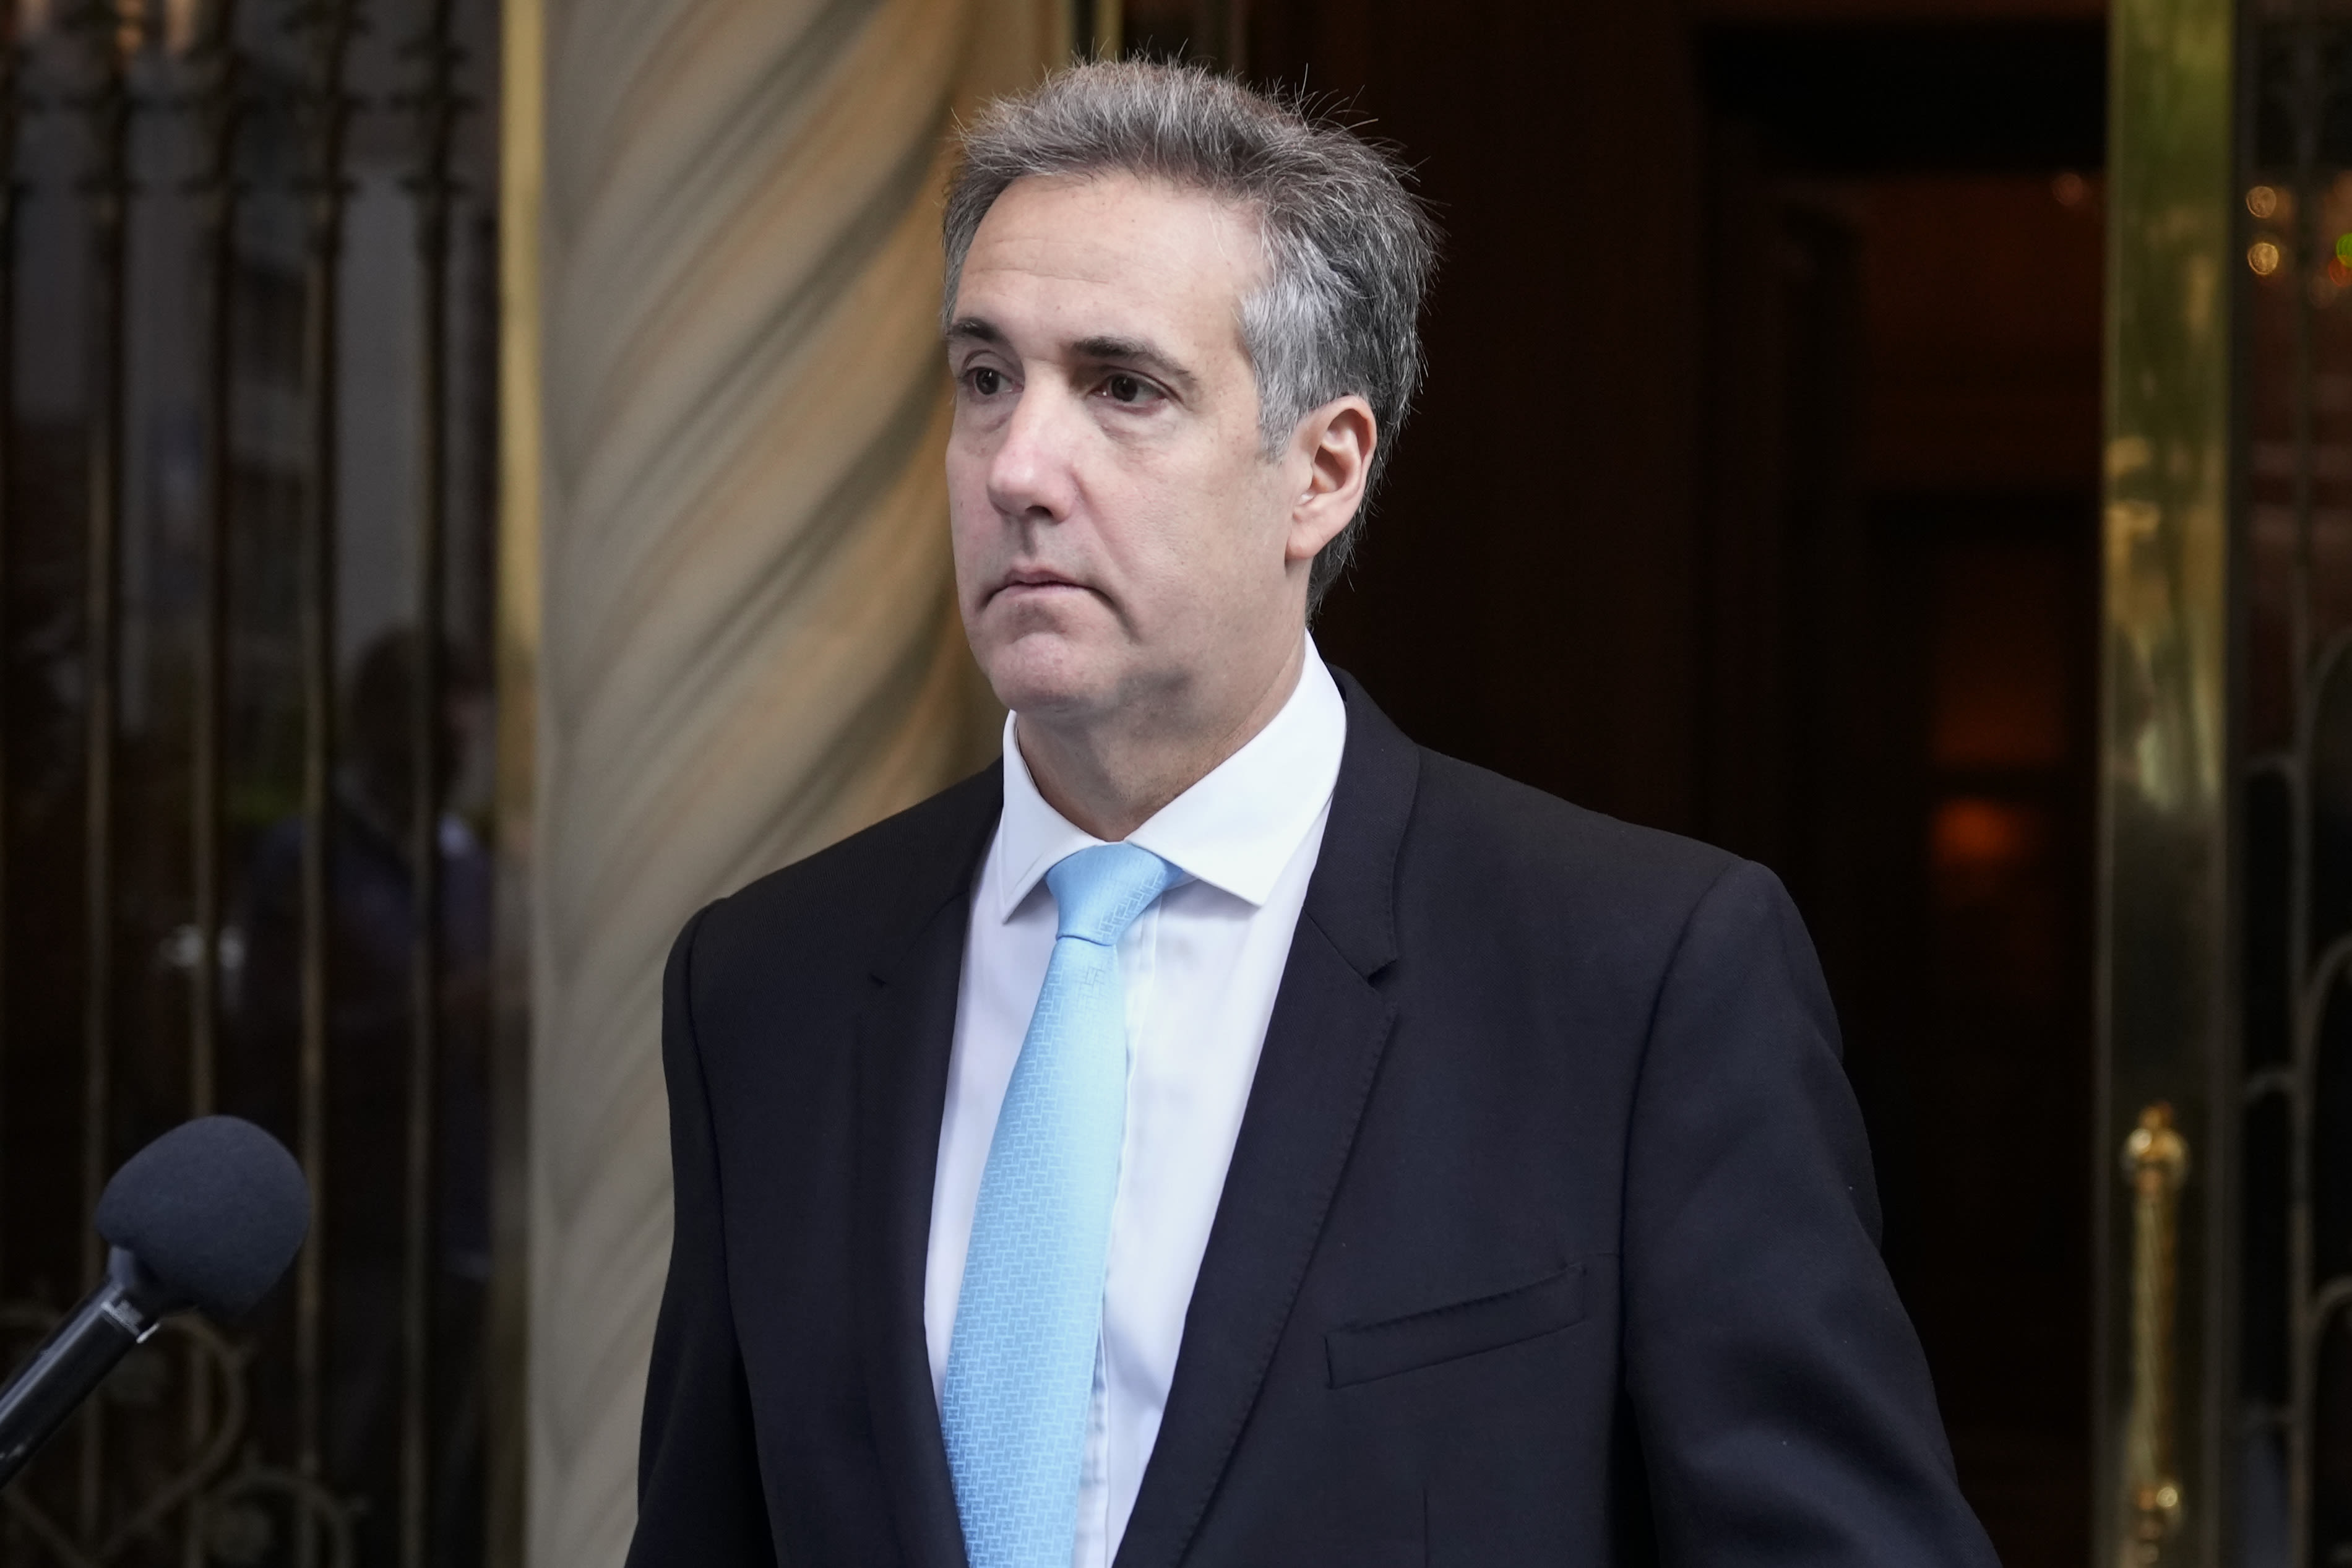 Trump trial updates: Michael Cohen testifies about discussing hush money reimbursement with Trump in Oval Office, admits he wants to see him convicted